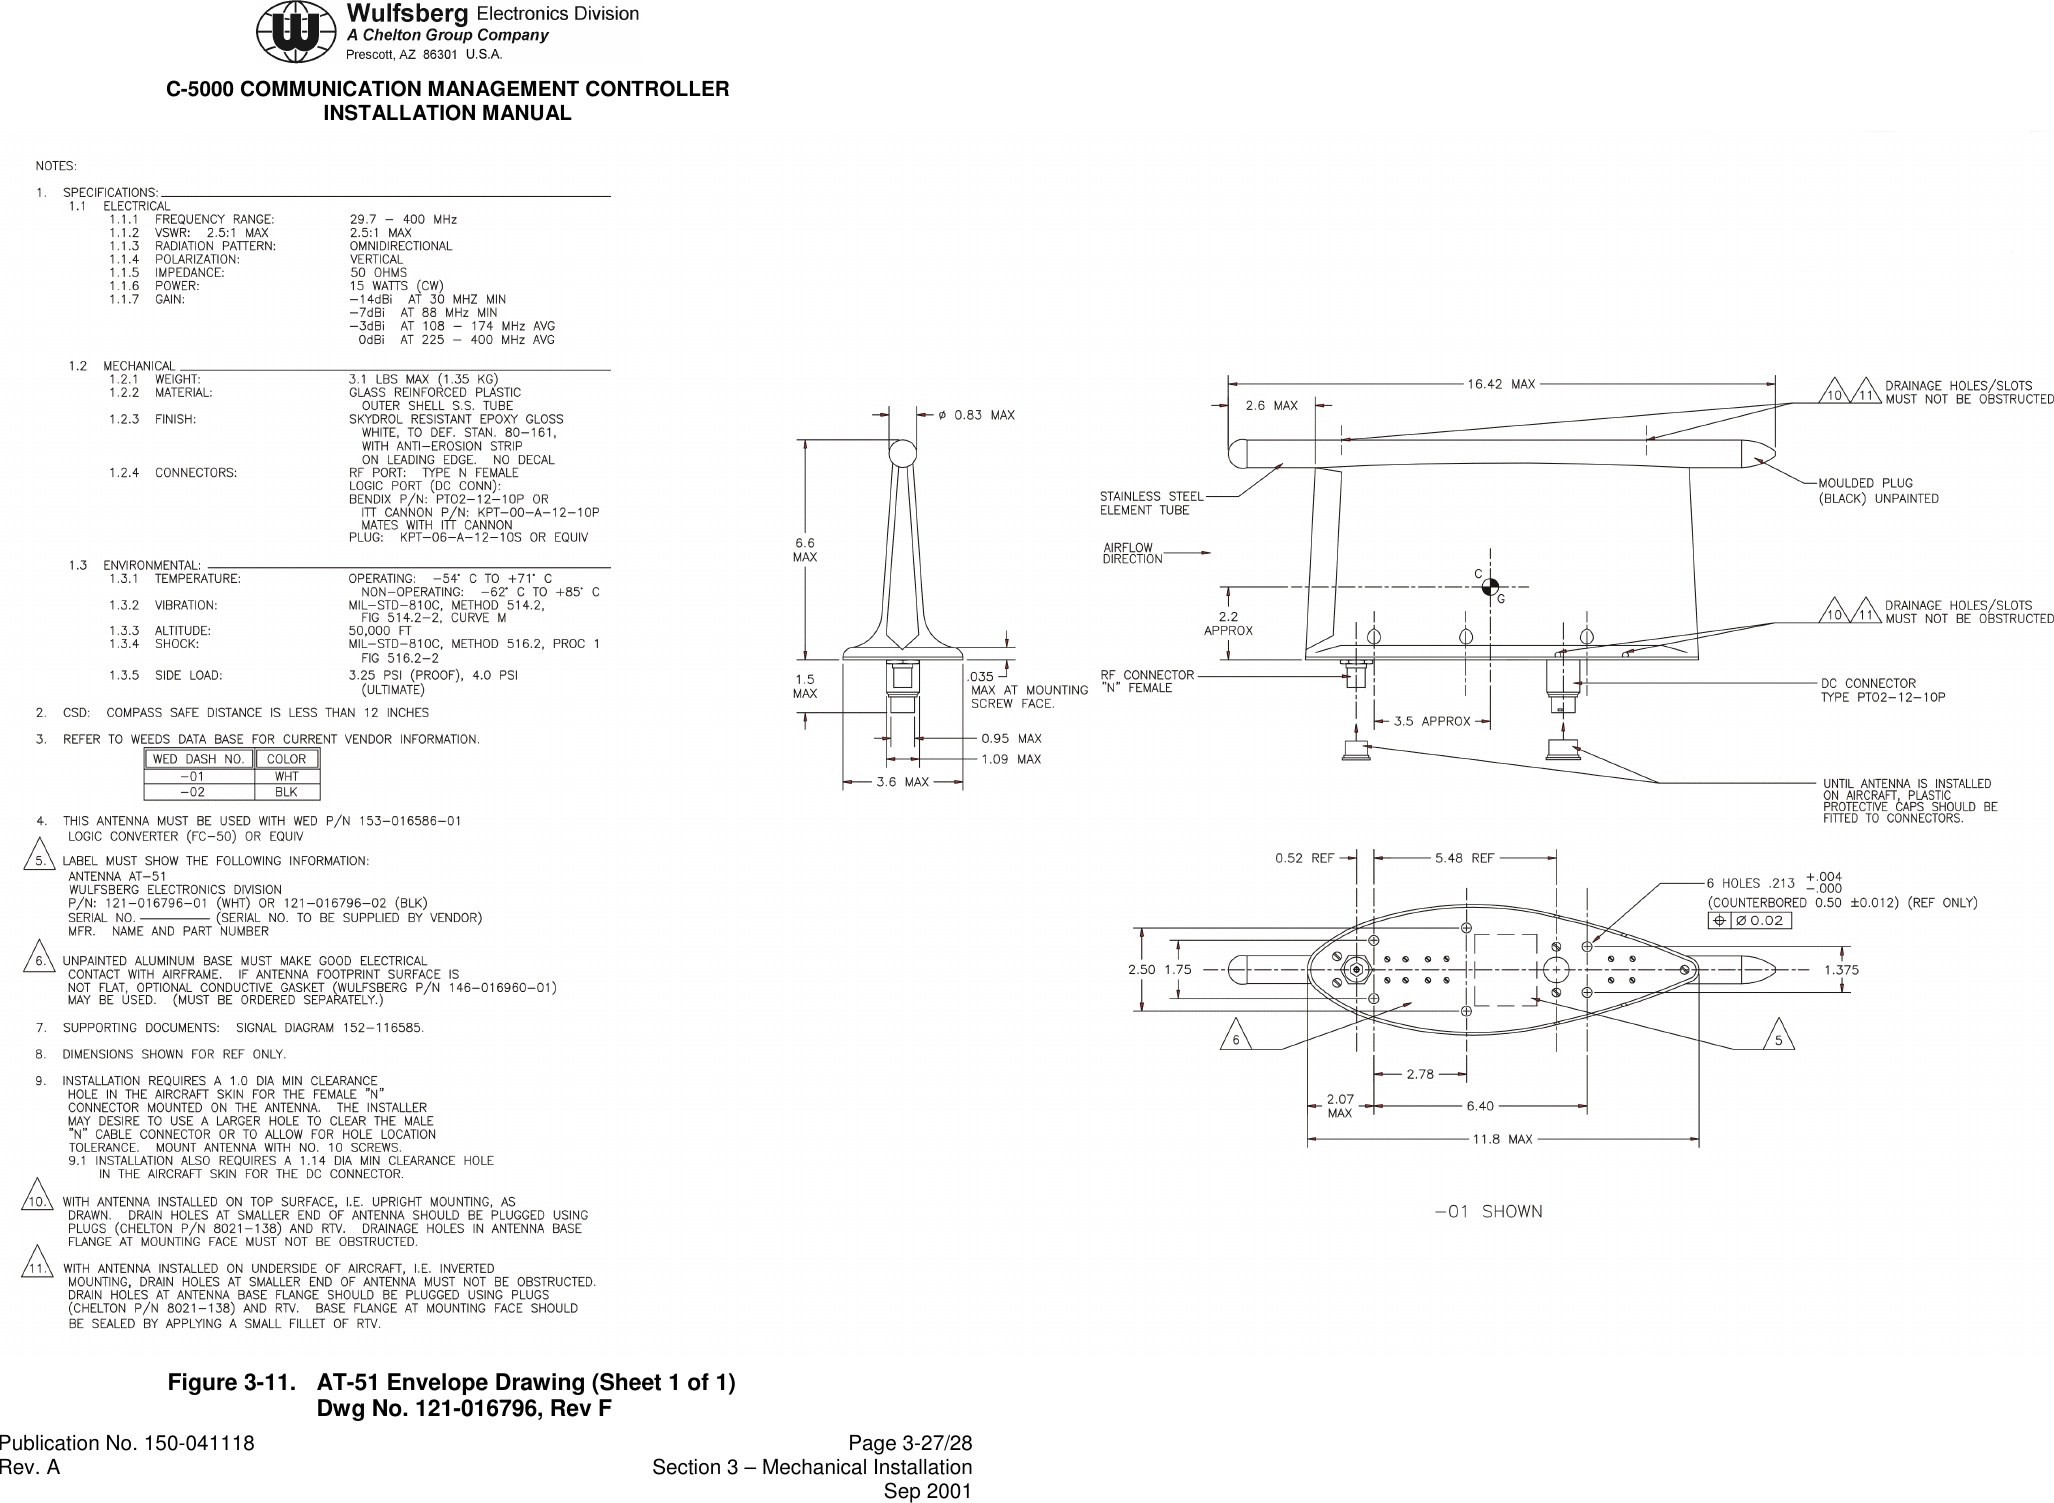 C-5000 COMMUNICATION MANAGEMENT CONTROLLERINSTALLATION MANUALPublication No. 150-041118 Page 3-27/28Rev. A Section 3 – Mechanical InstallationSep 2001Figure 3-11. AT-51 Envelope Drawing (Sheet 1 of 1)Dwg No. 121-016796, Rev F